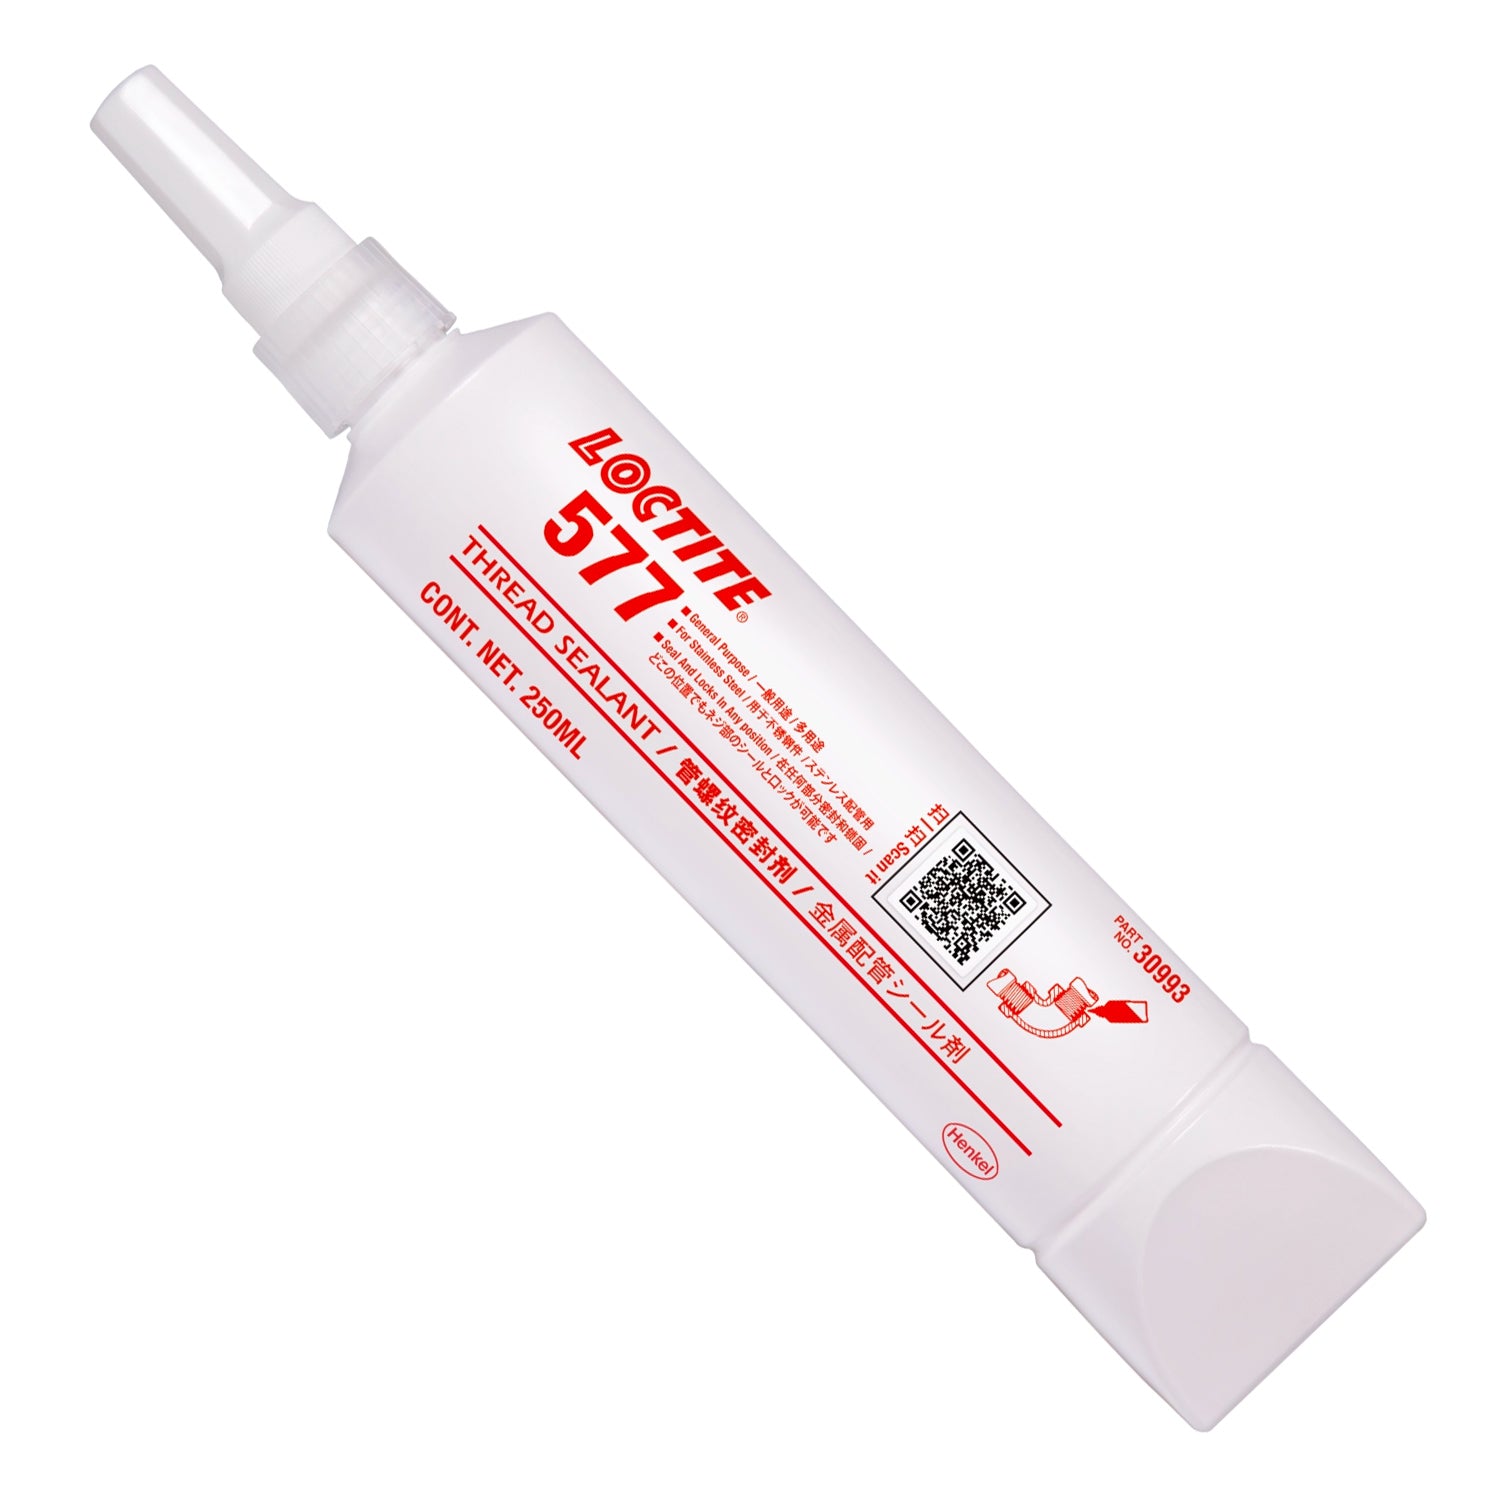 LOCTITE 577 - Thread Sealant / for Metal Threads only 39,95 €